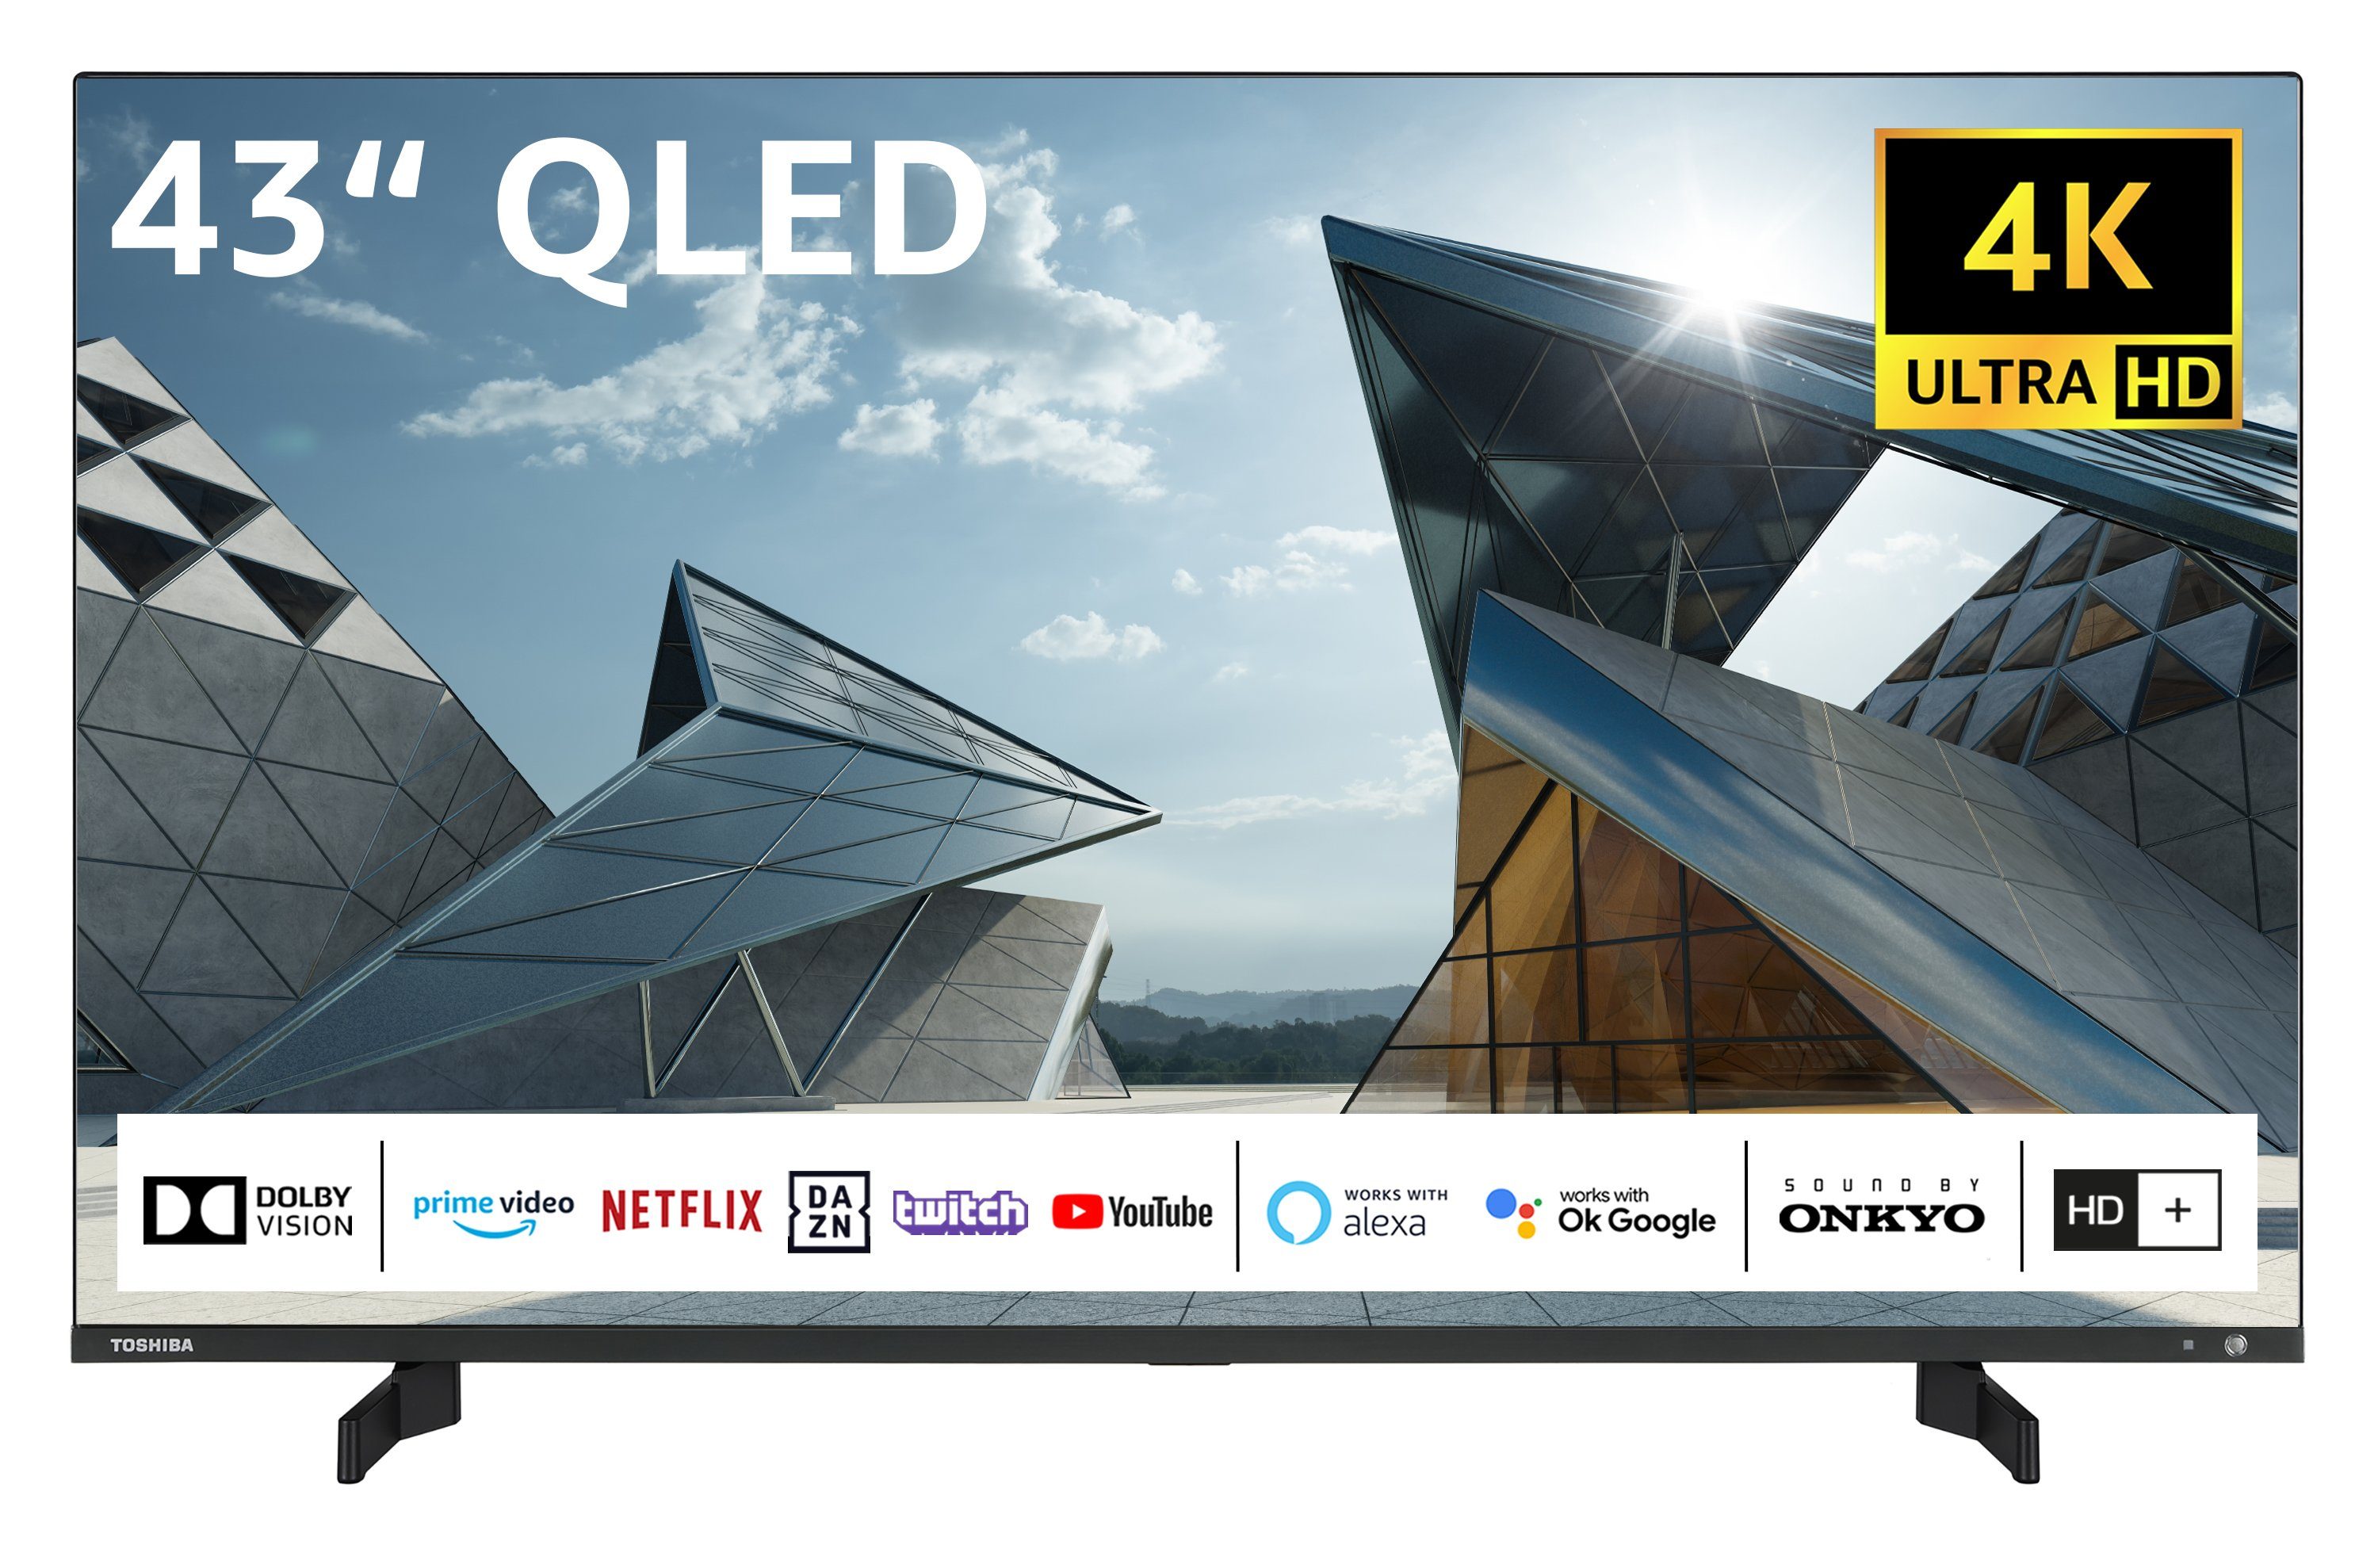 TV, Sound (108 6 Toshiba - Zoll, cm/43 4K Dolby 43QL5D63DAY Ultra QLED-Fernseher Vision, Onkyo Monate Inkl. Triple-Tuner, by HDR Smart HD) HD,